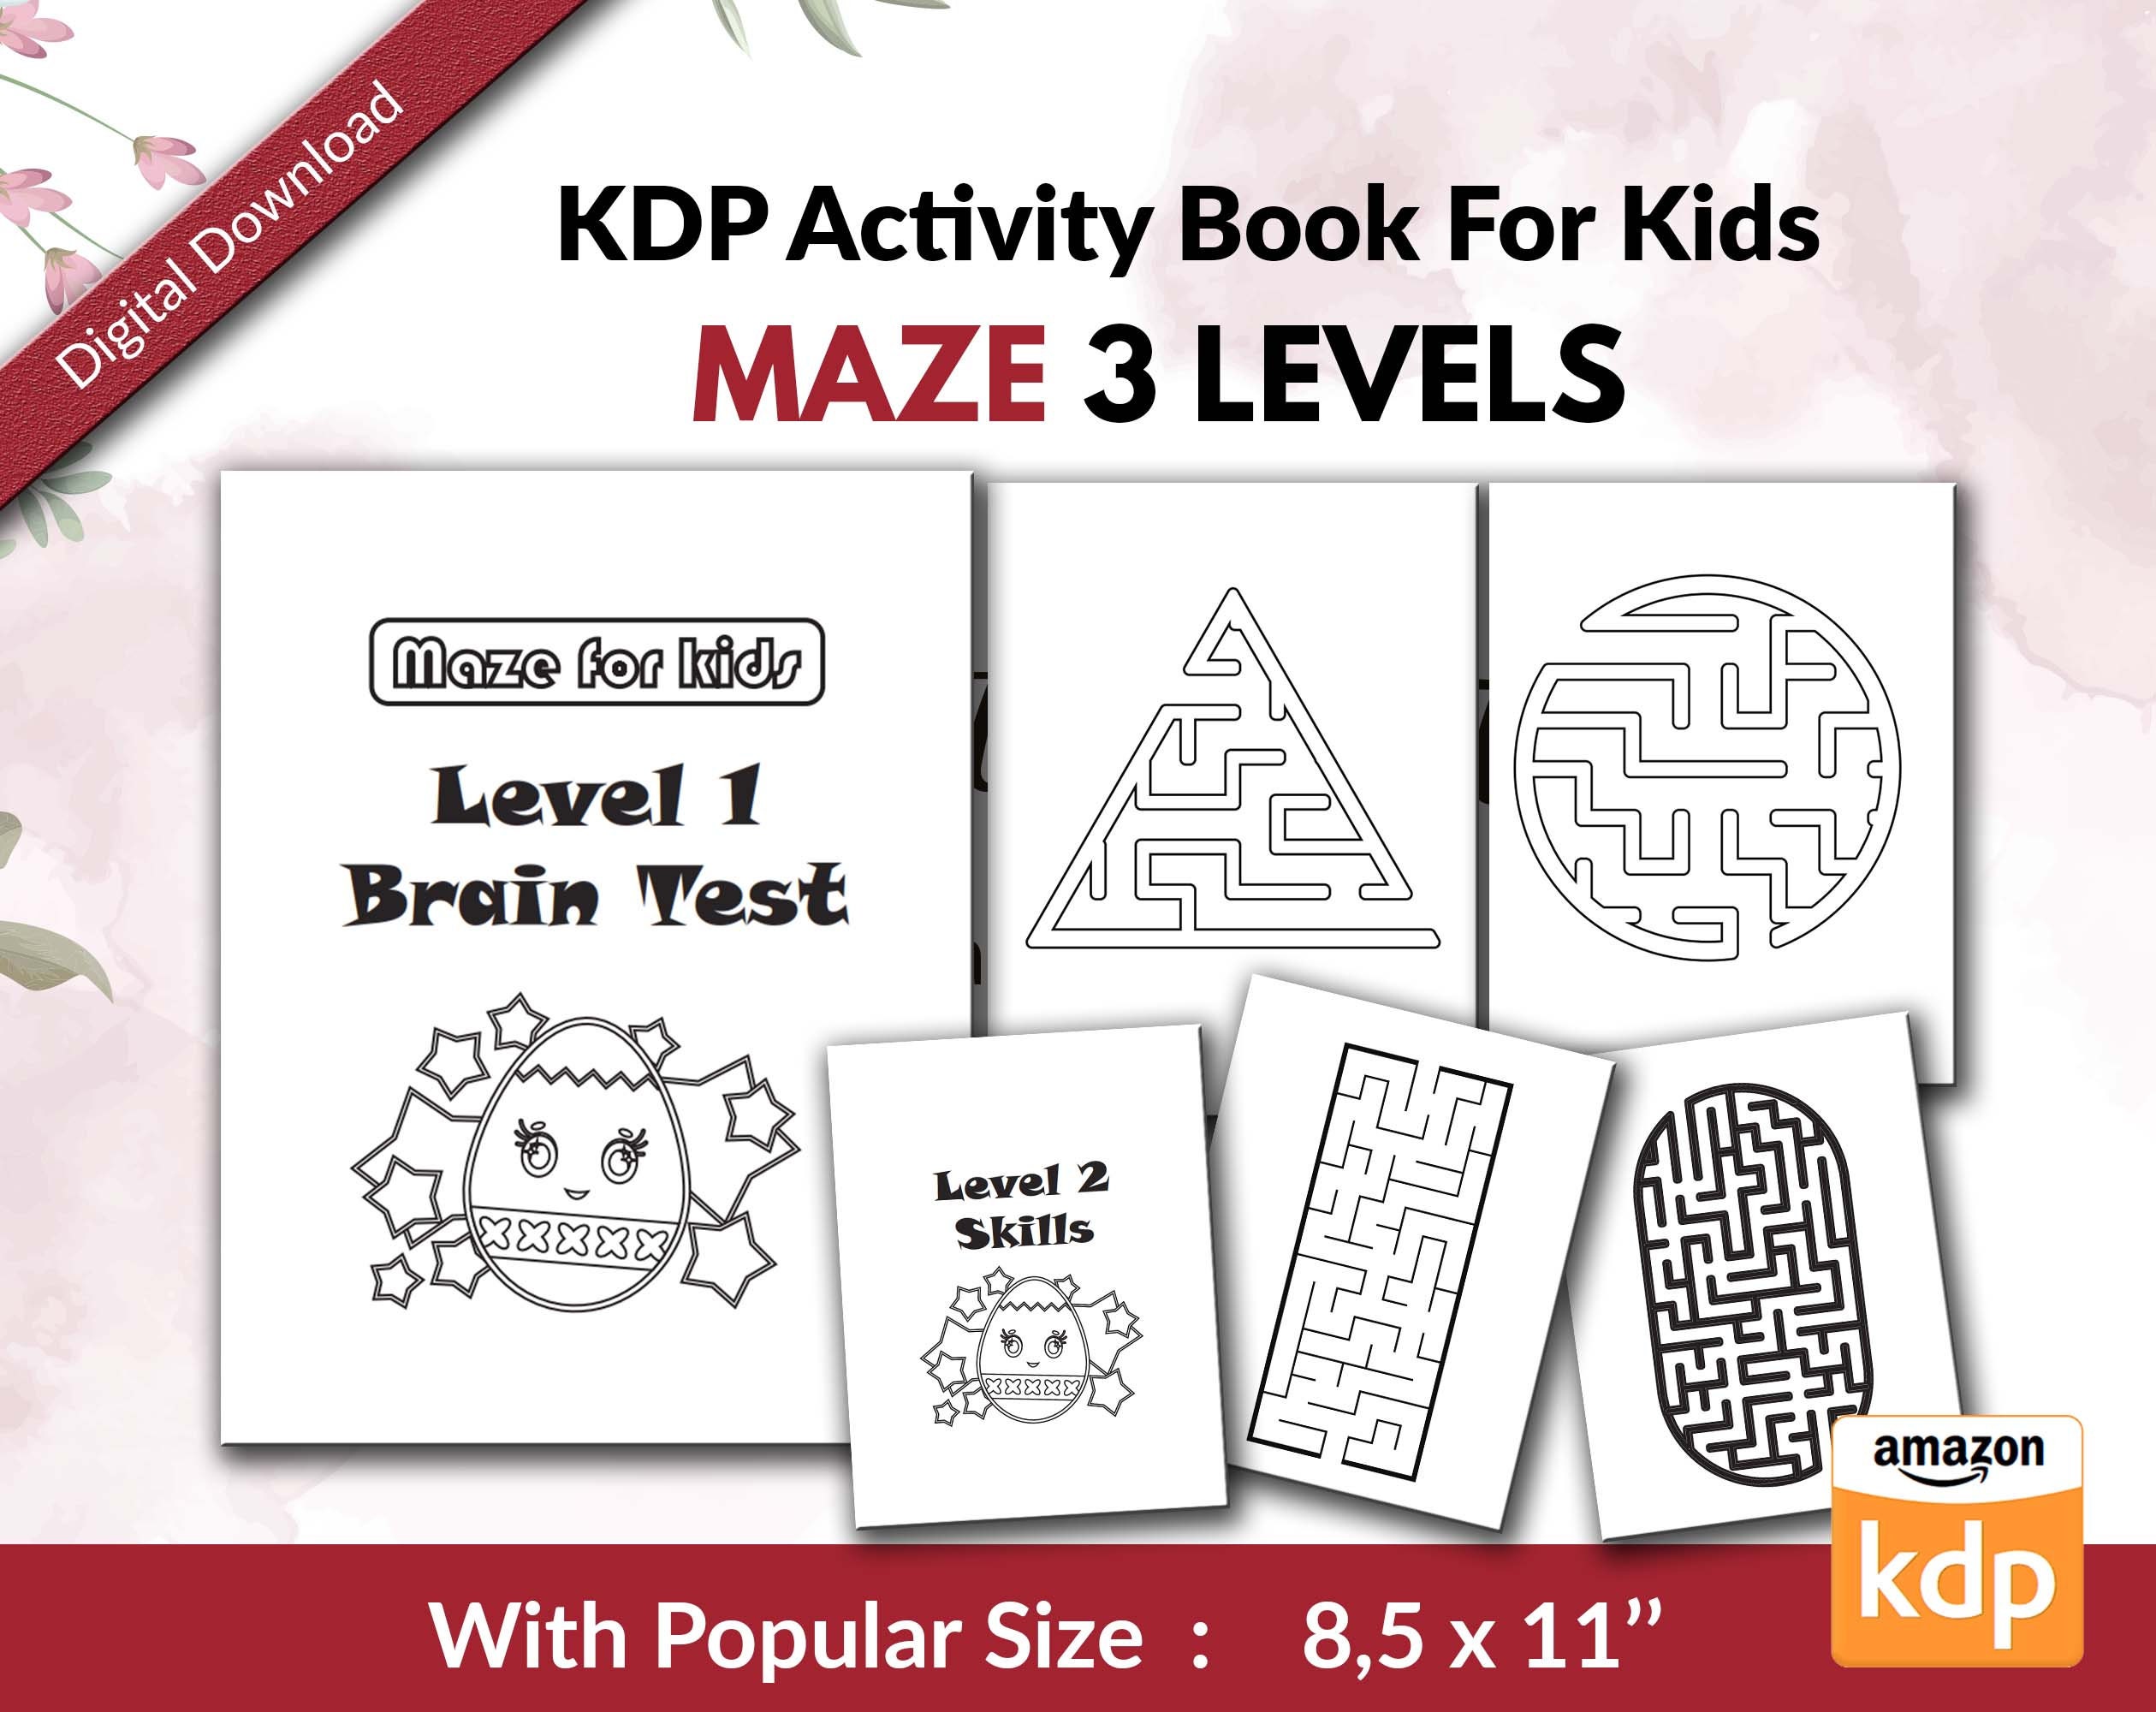 My Book Of Amazing Mazes: For Kids Ages 4-6. Best Maze Activity Book for Kids. Amazing Problem Solving and Skill Developing Maze Workbook. (Maze Books For Kids) [Book]